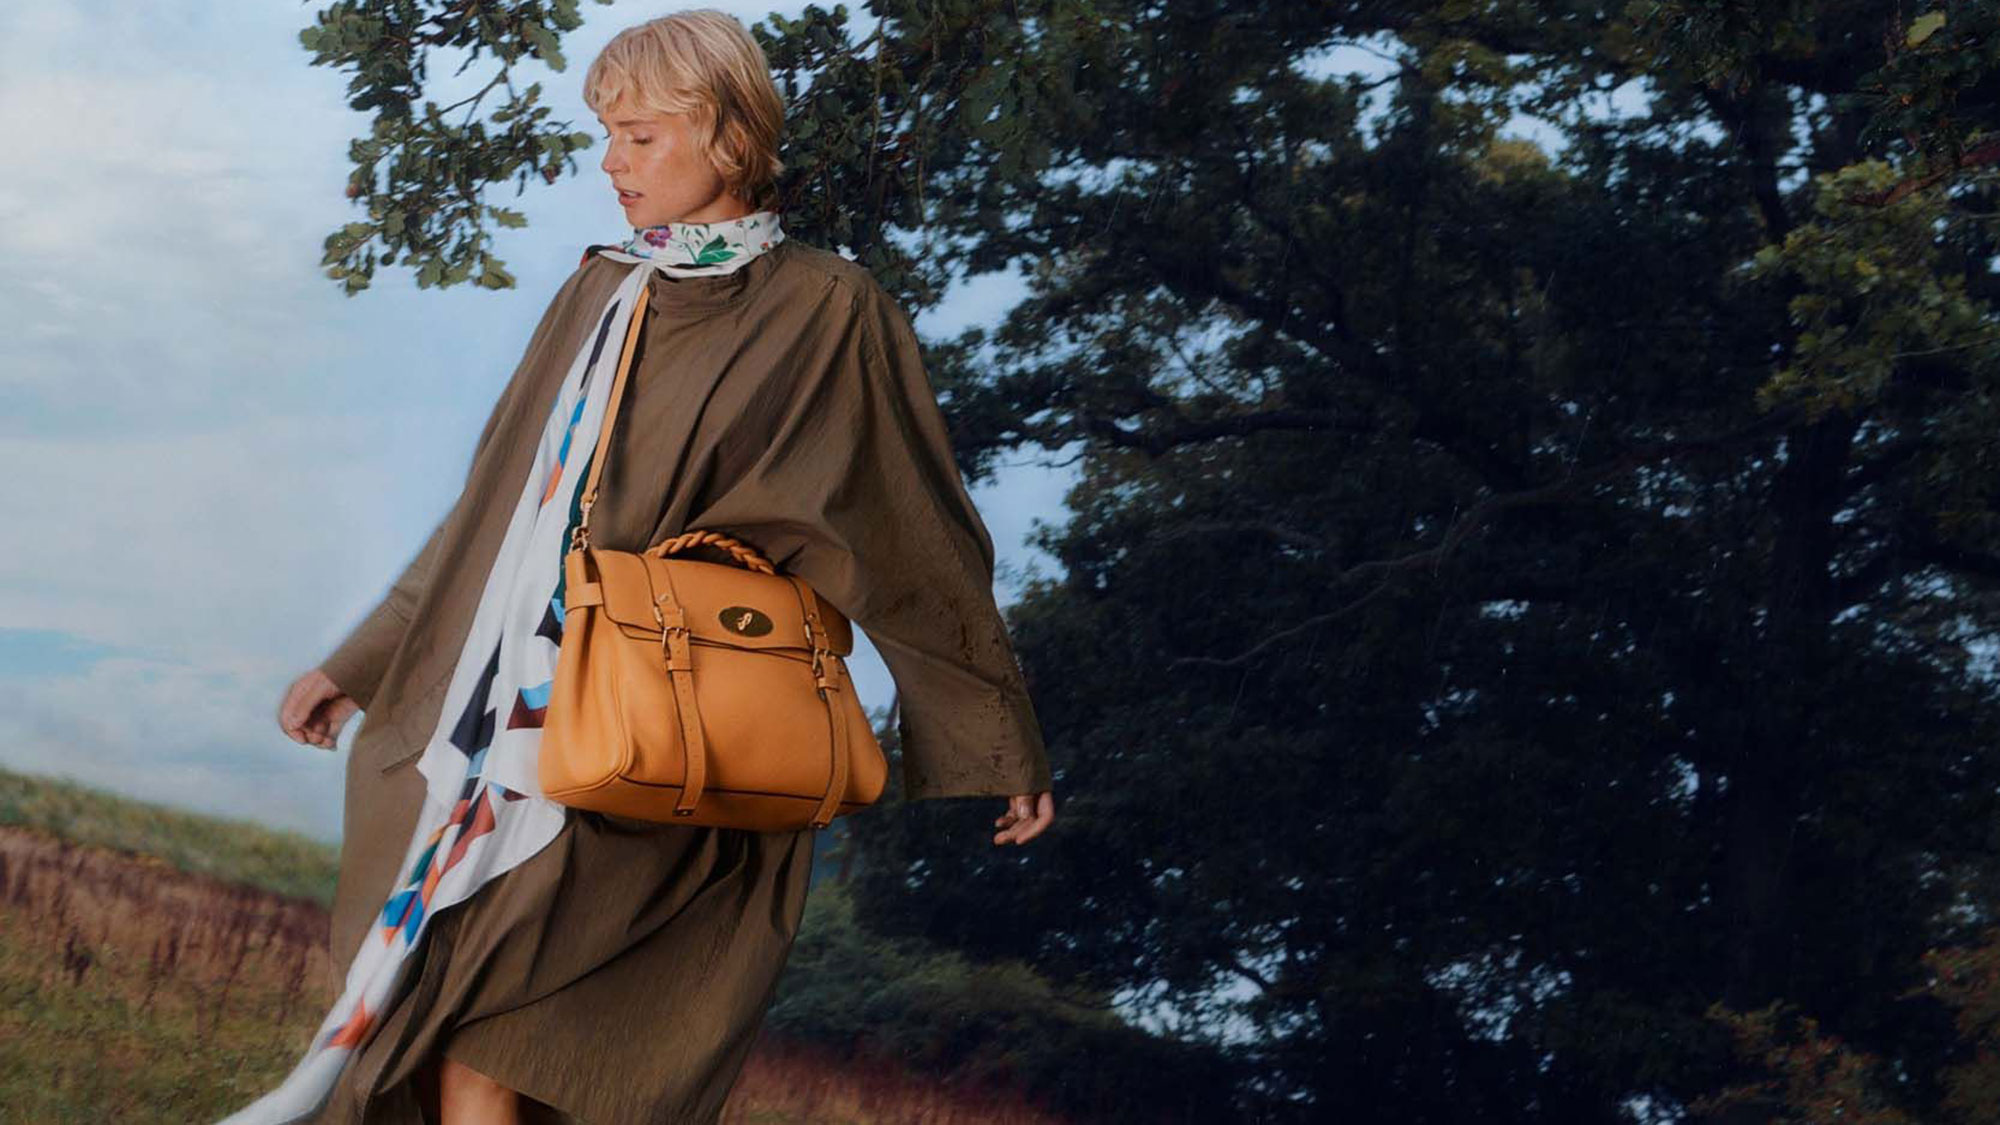 Mulberry just brought back its iconic Alexa bag